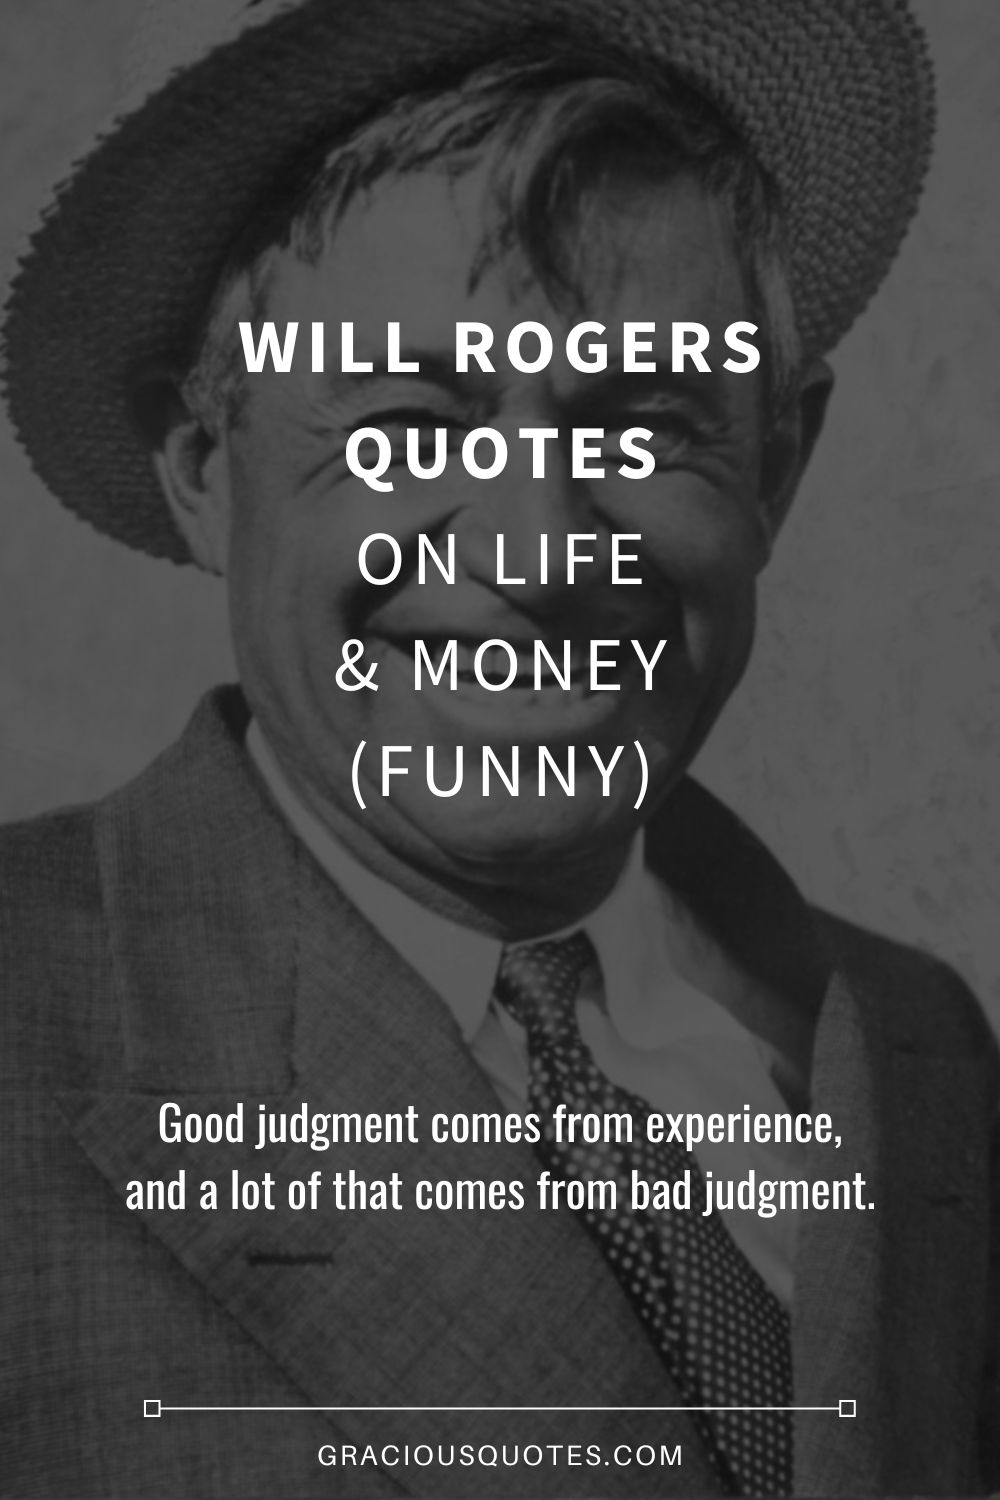 65 Will Rogers Quotes on Life & Money (FUNNY)